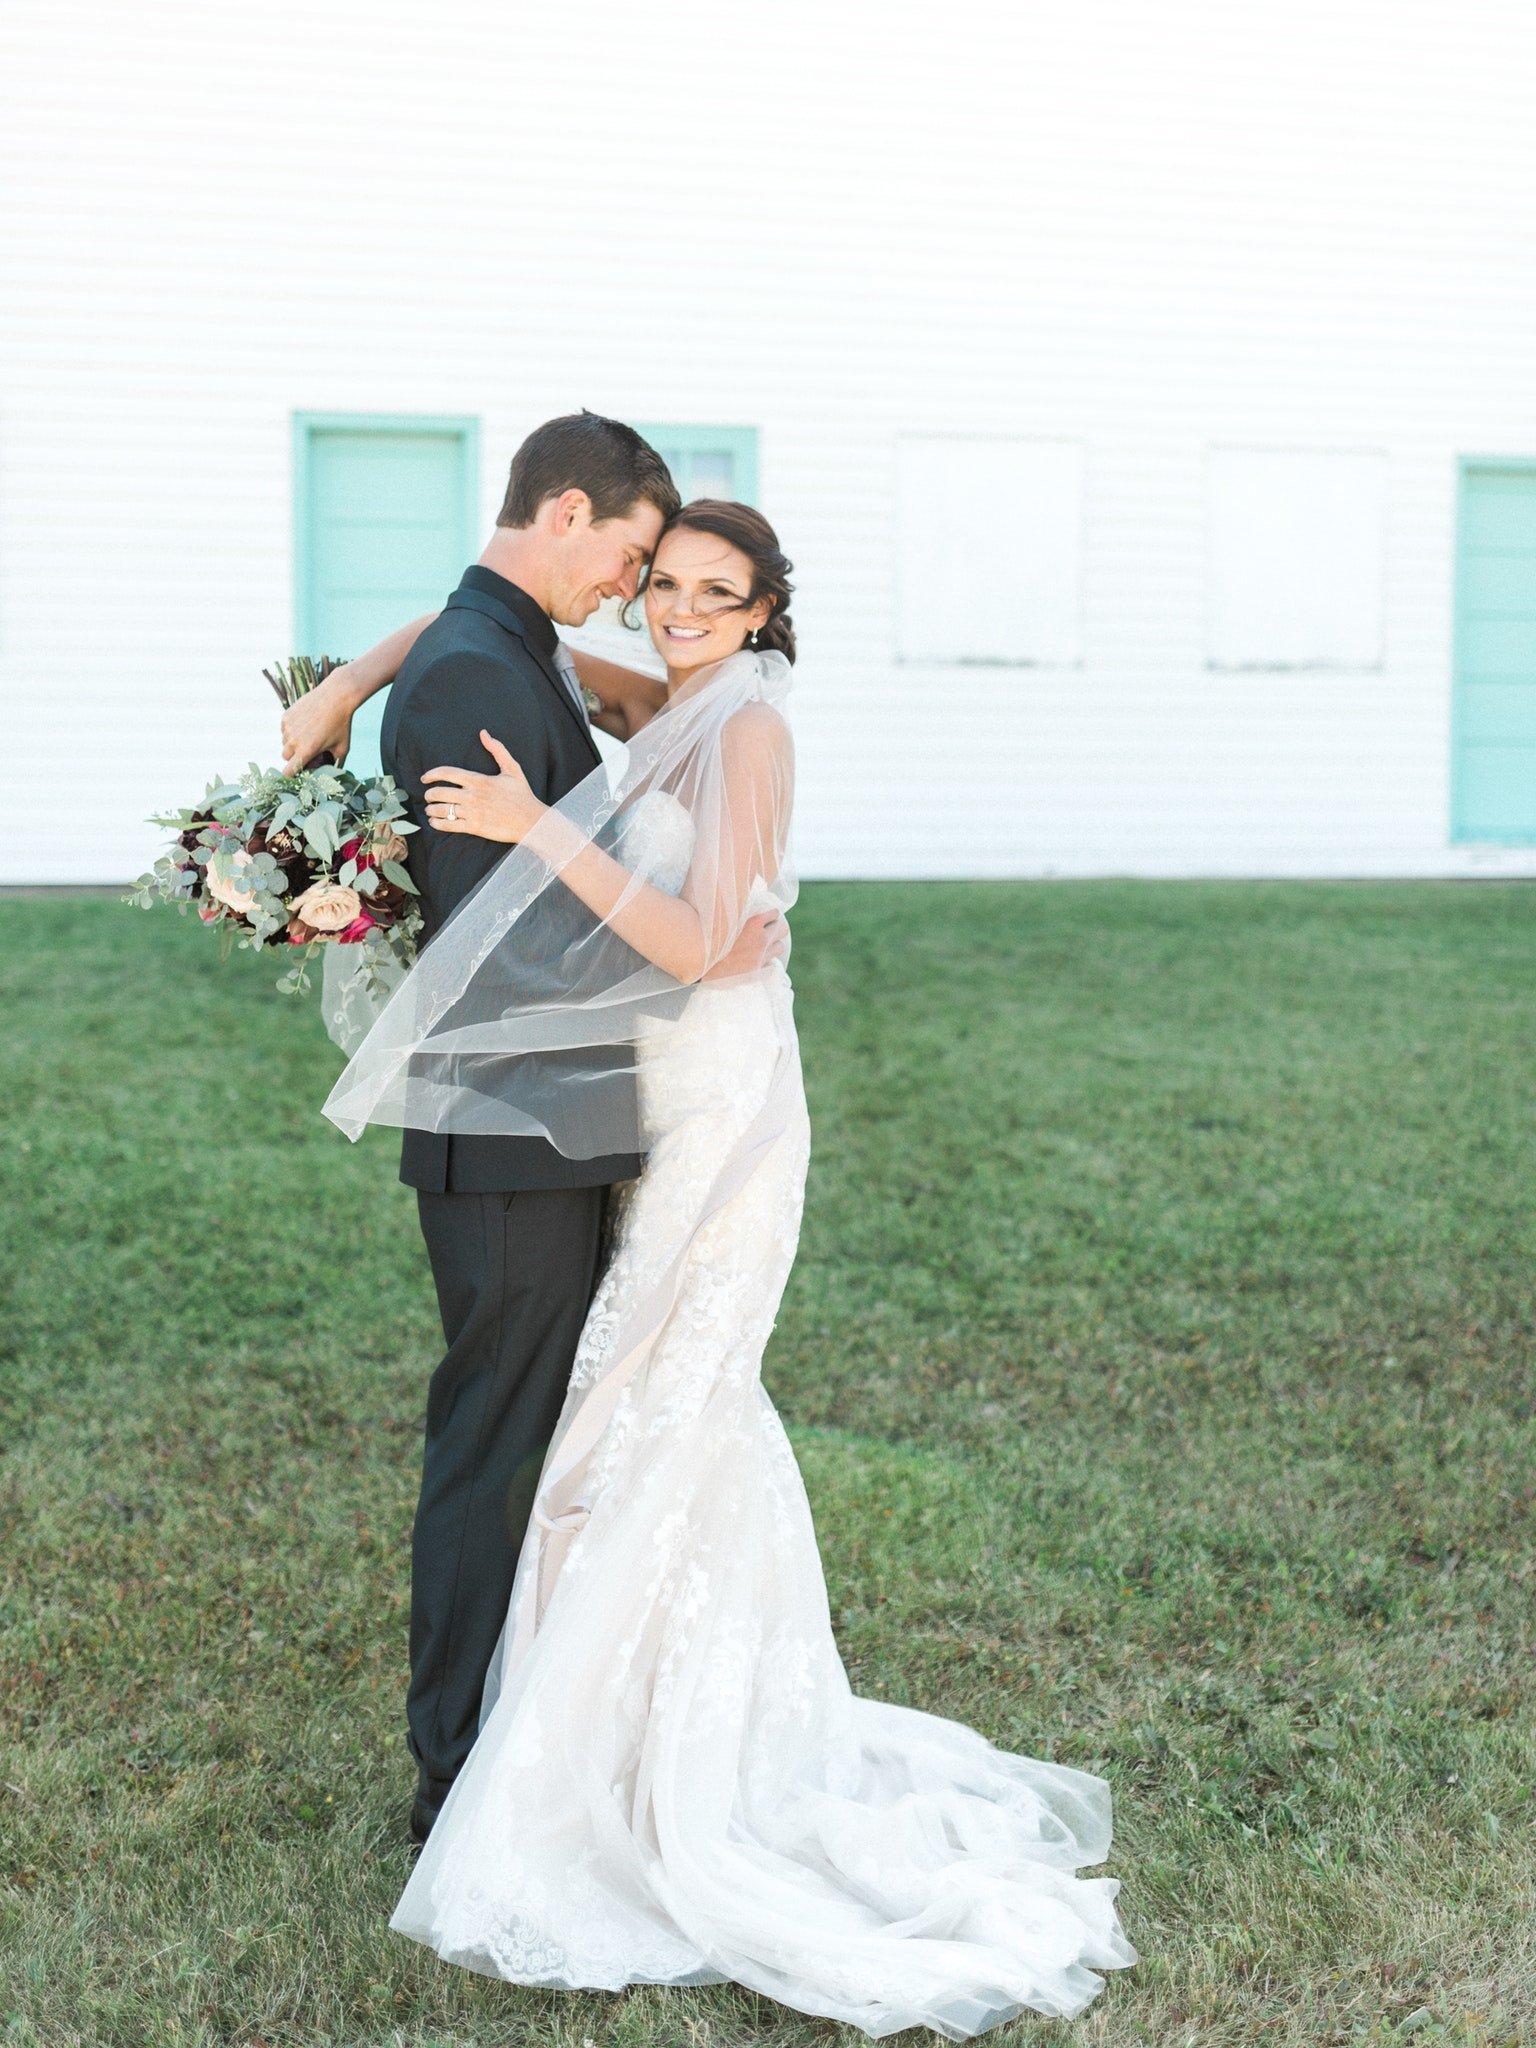 Groom and bride embrace while holding florals